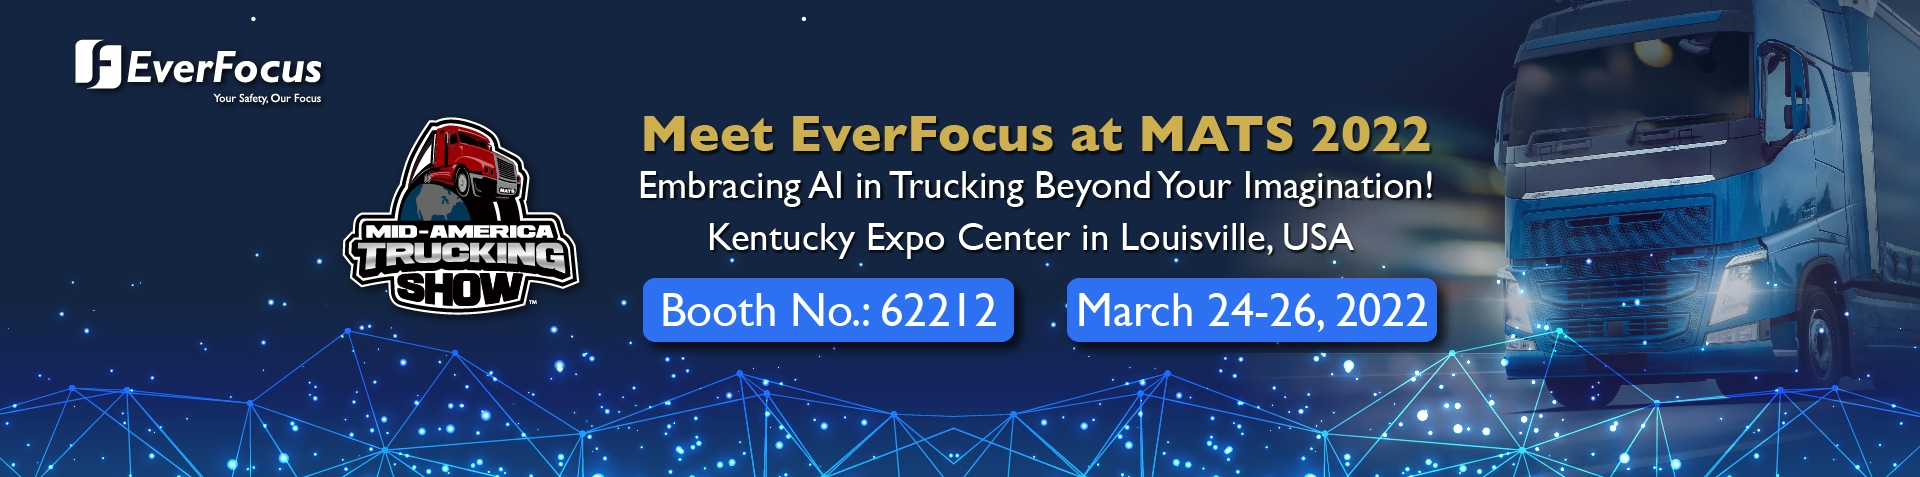 EverFocus will be embracing AI in trucking at Mid-America Trucking Show (MATS)!